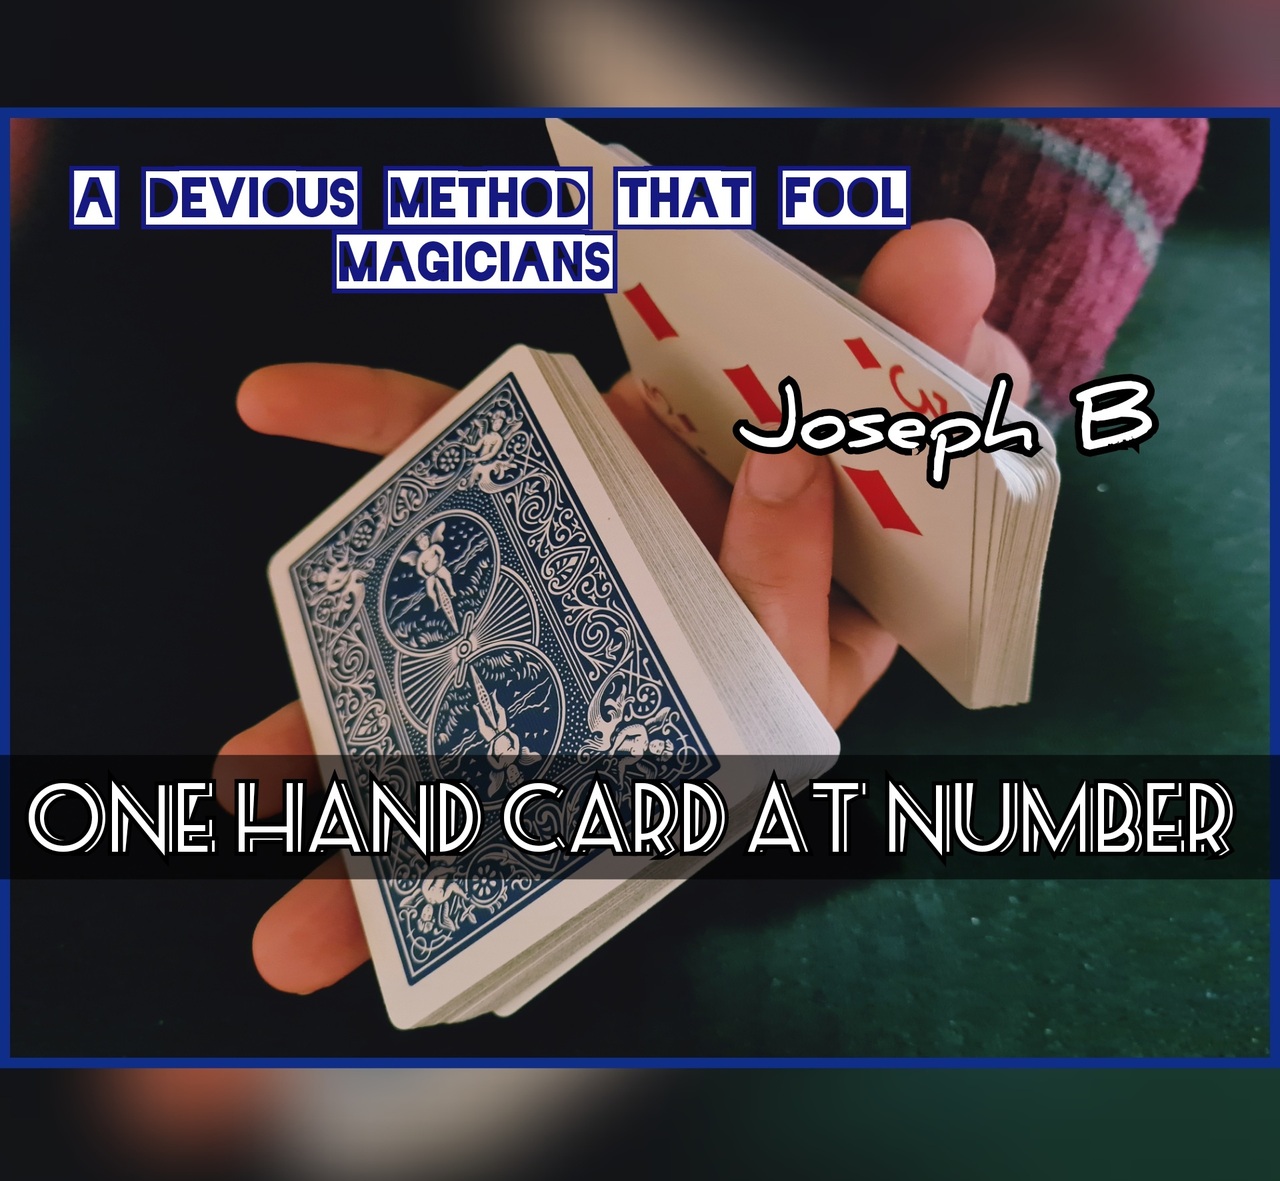 One Hand Card At Number by Joseph B. (MP4 Video Download)